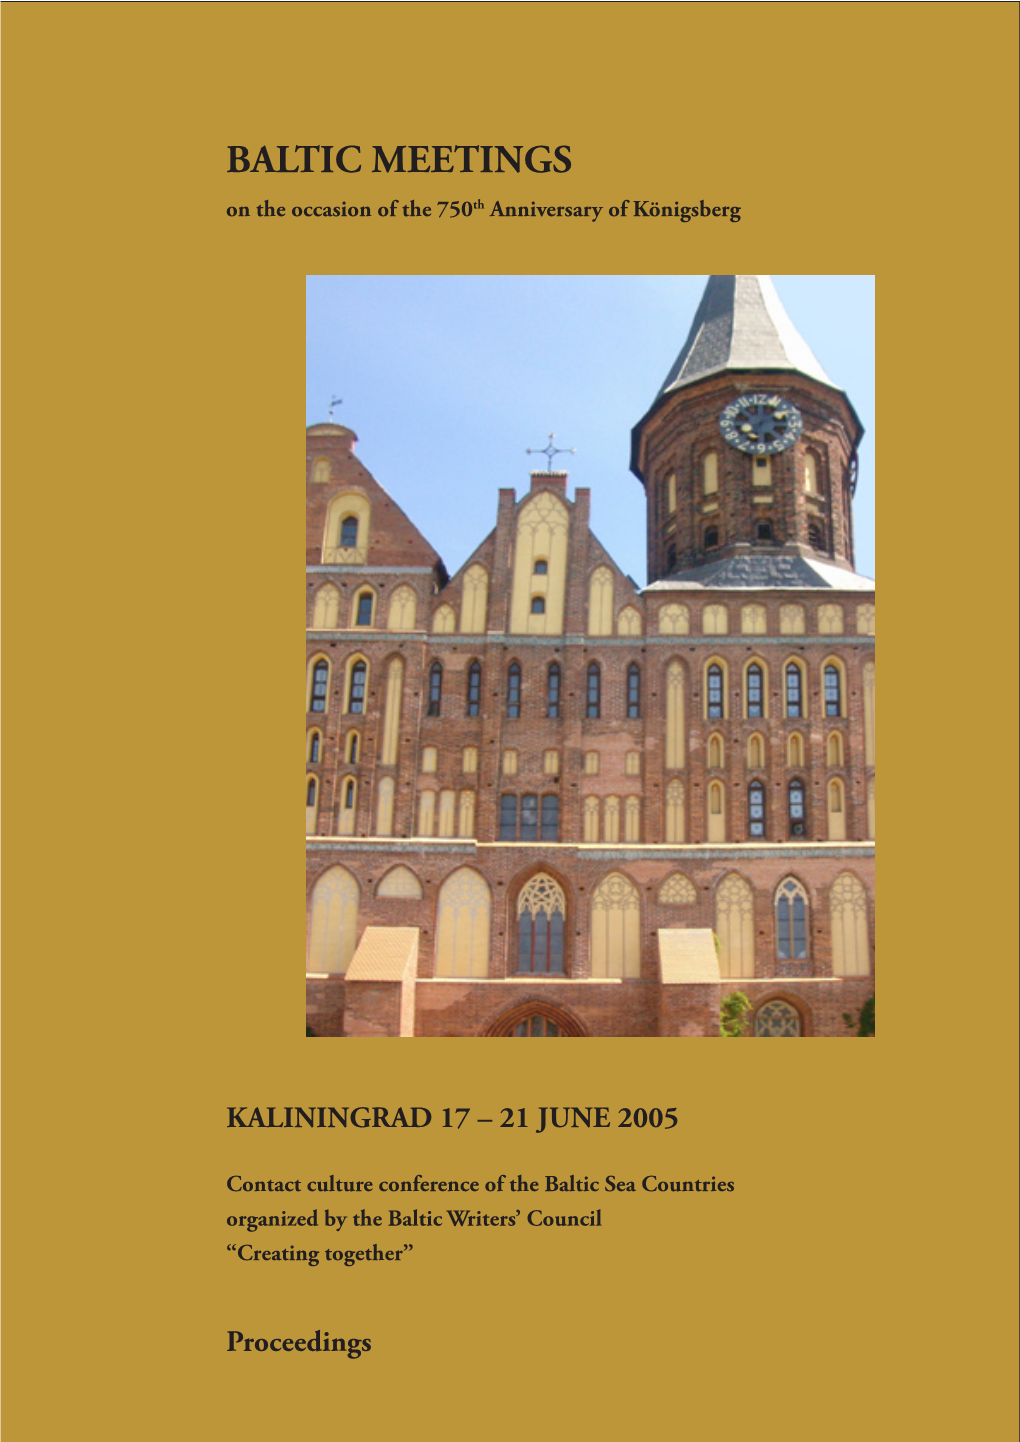 BALTIC MEETINGS on the Occasion of the 750Th Anniversary of Königsberg